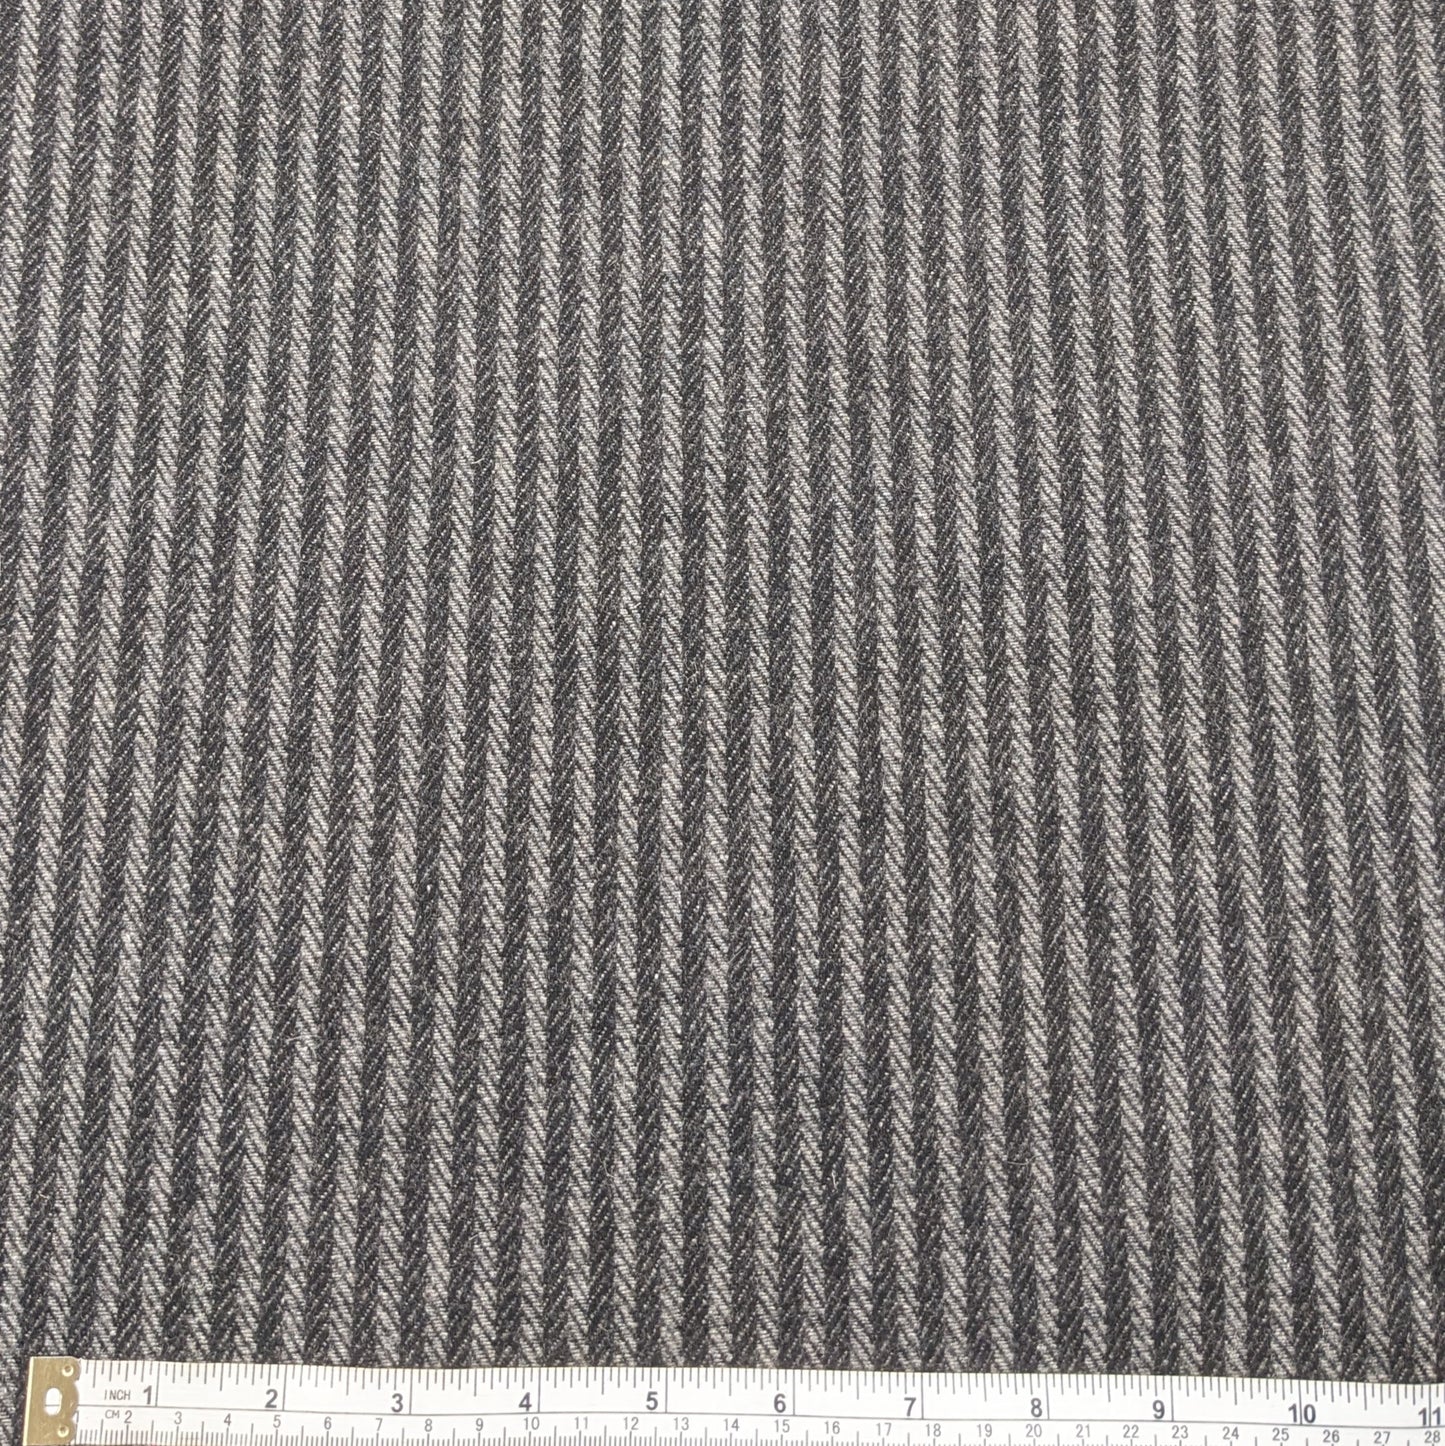 Wool and Polyester Tweed Stripe Fabric - Grey and Charcoal